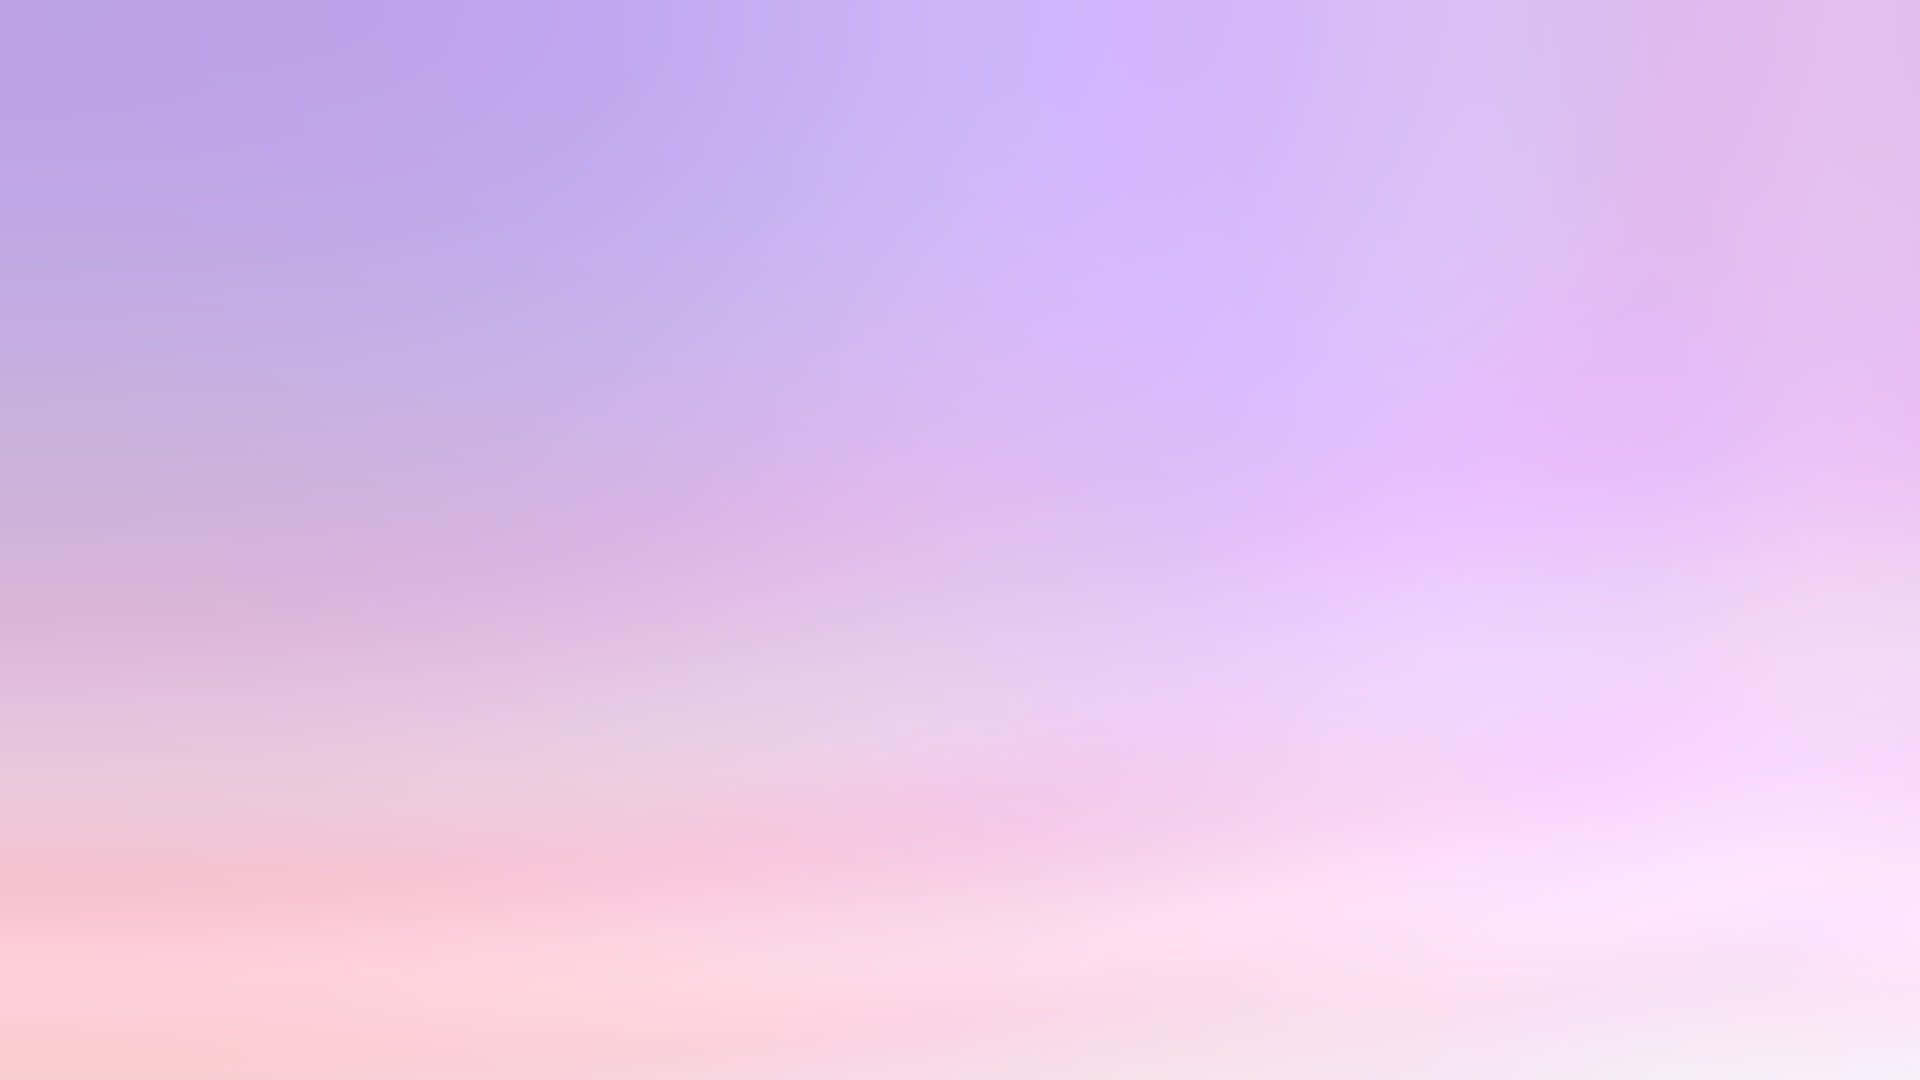 A Pink And Purple Background With A Cloud Wallpaper